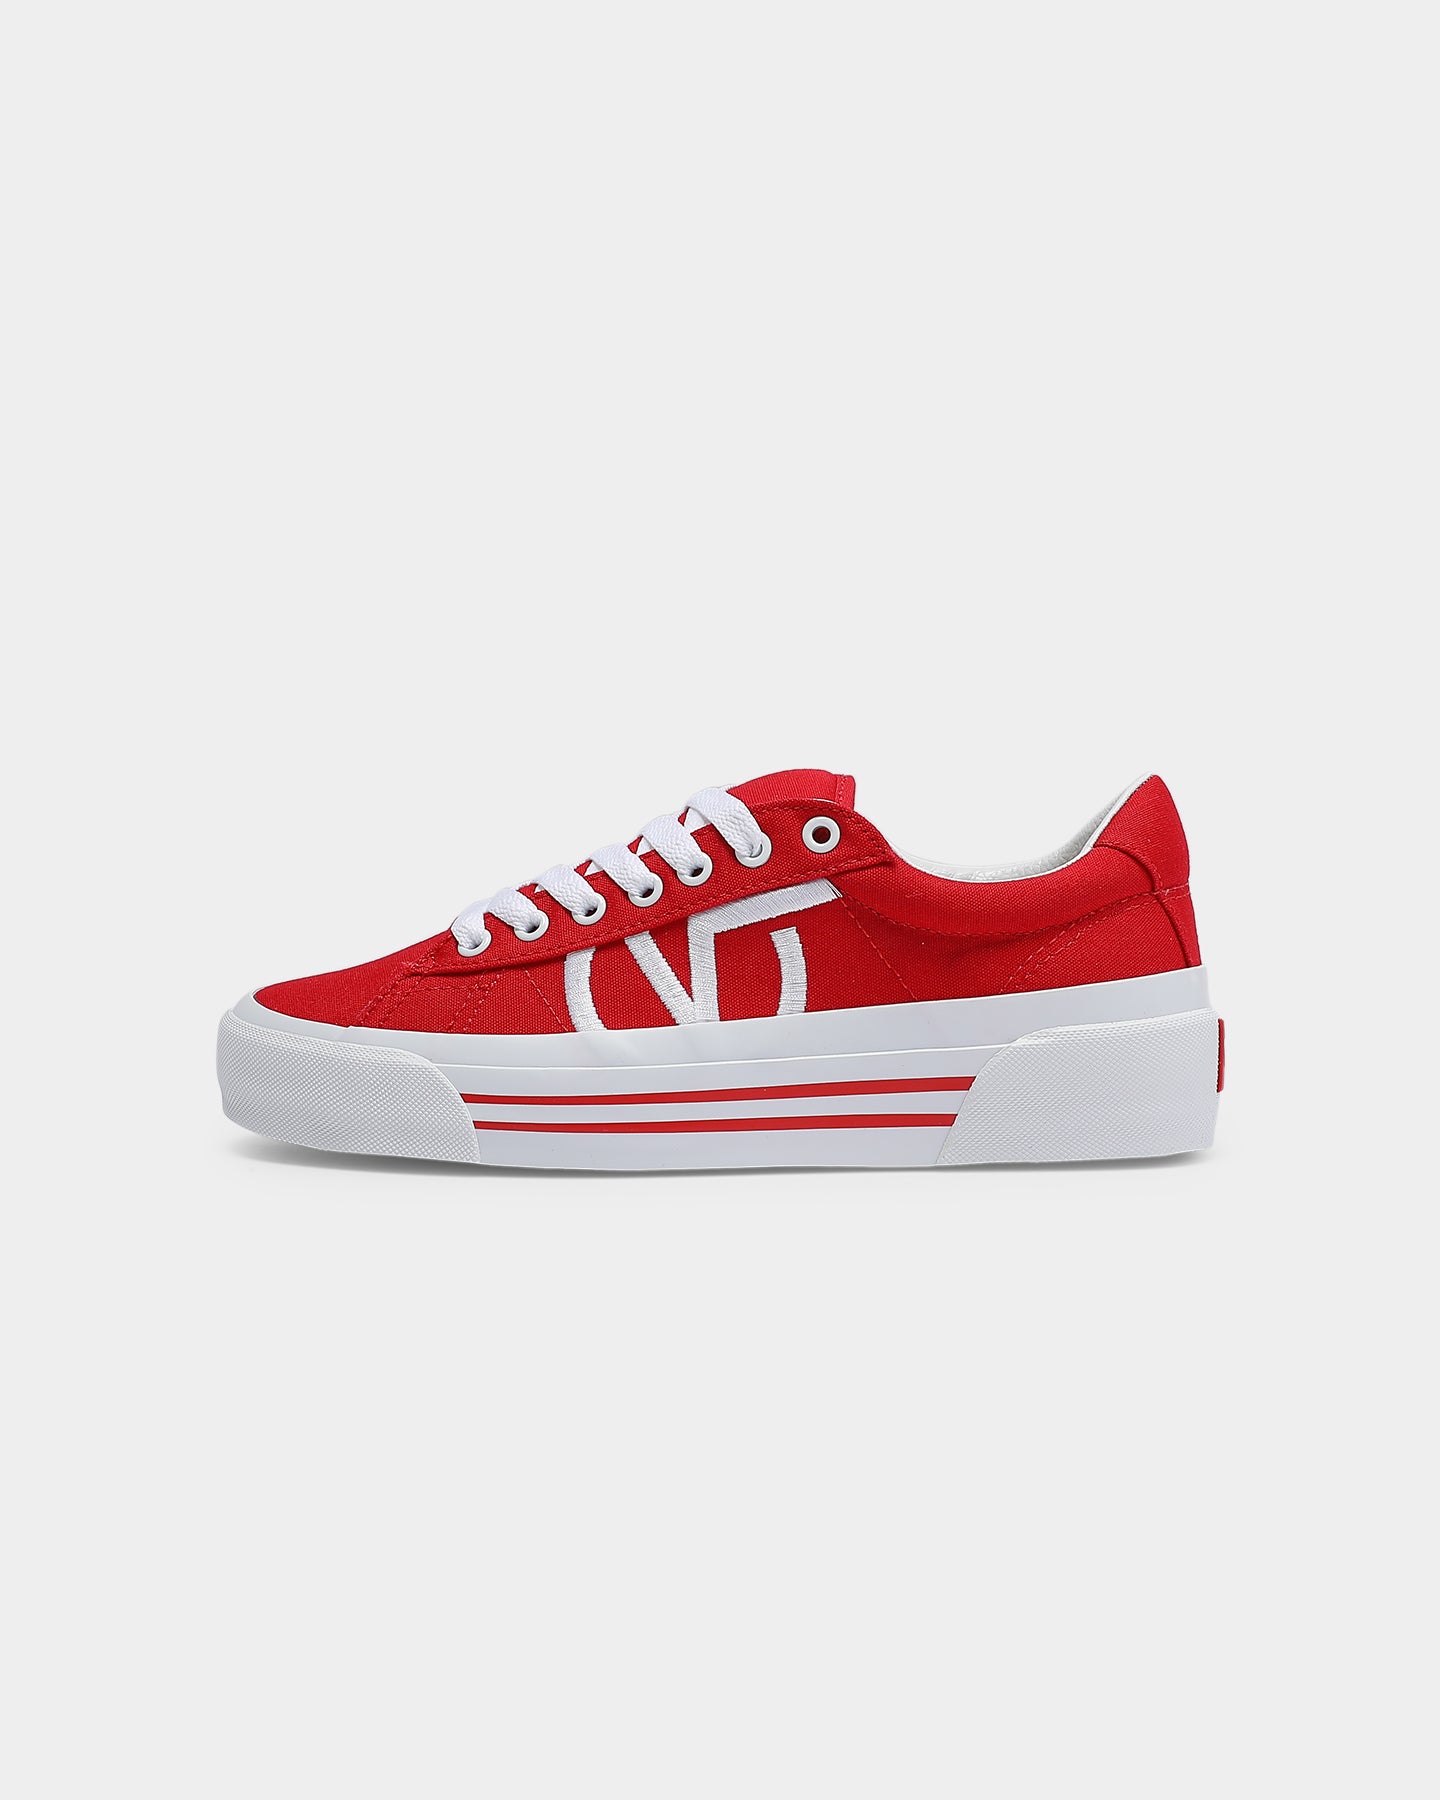 Vans Canvas Sid Ni Red/White | Culture 